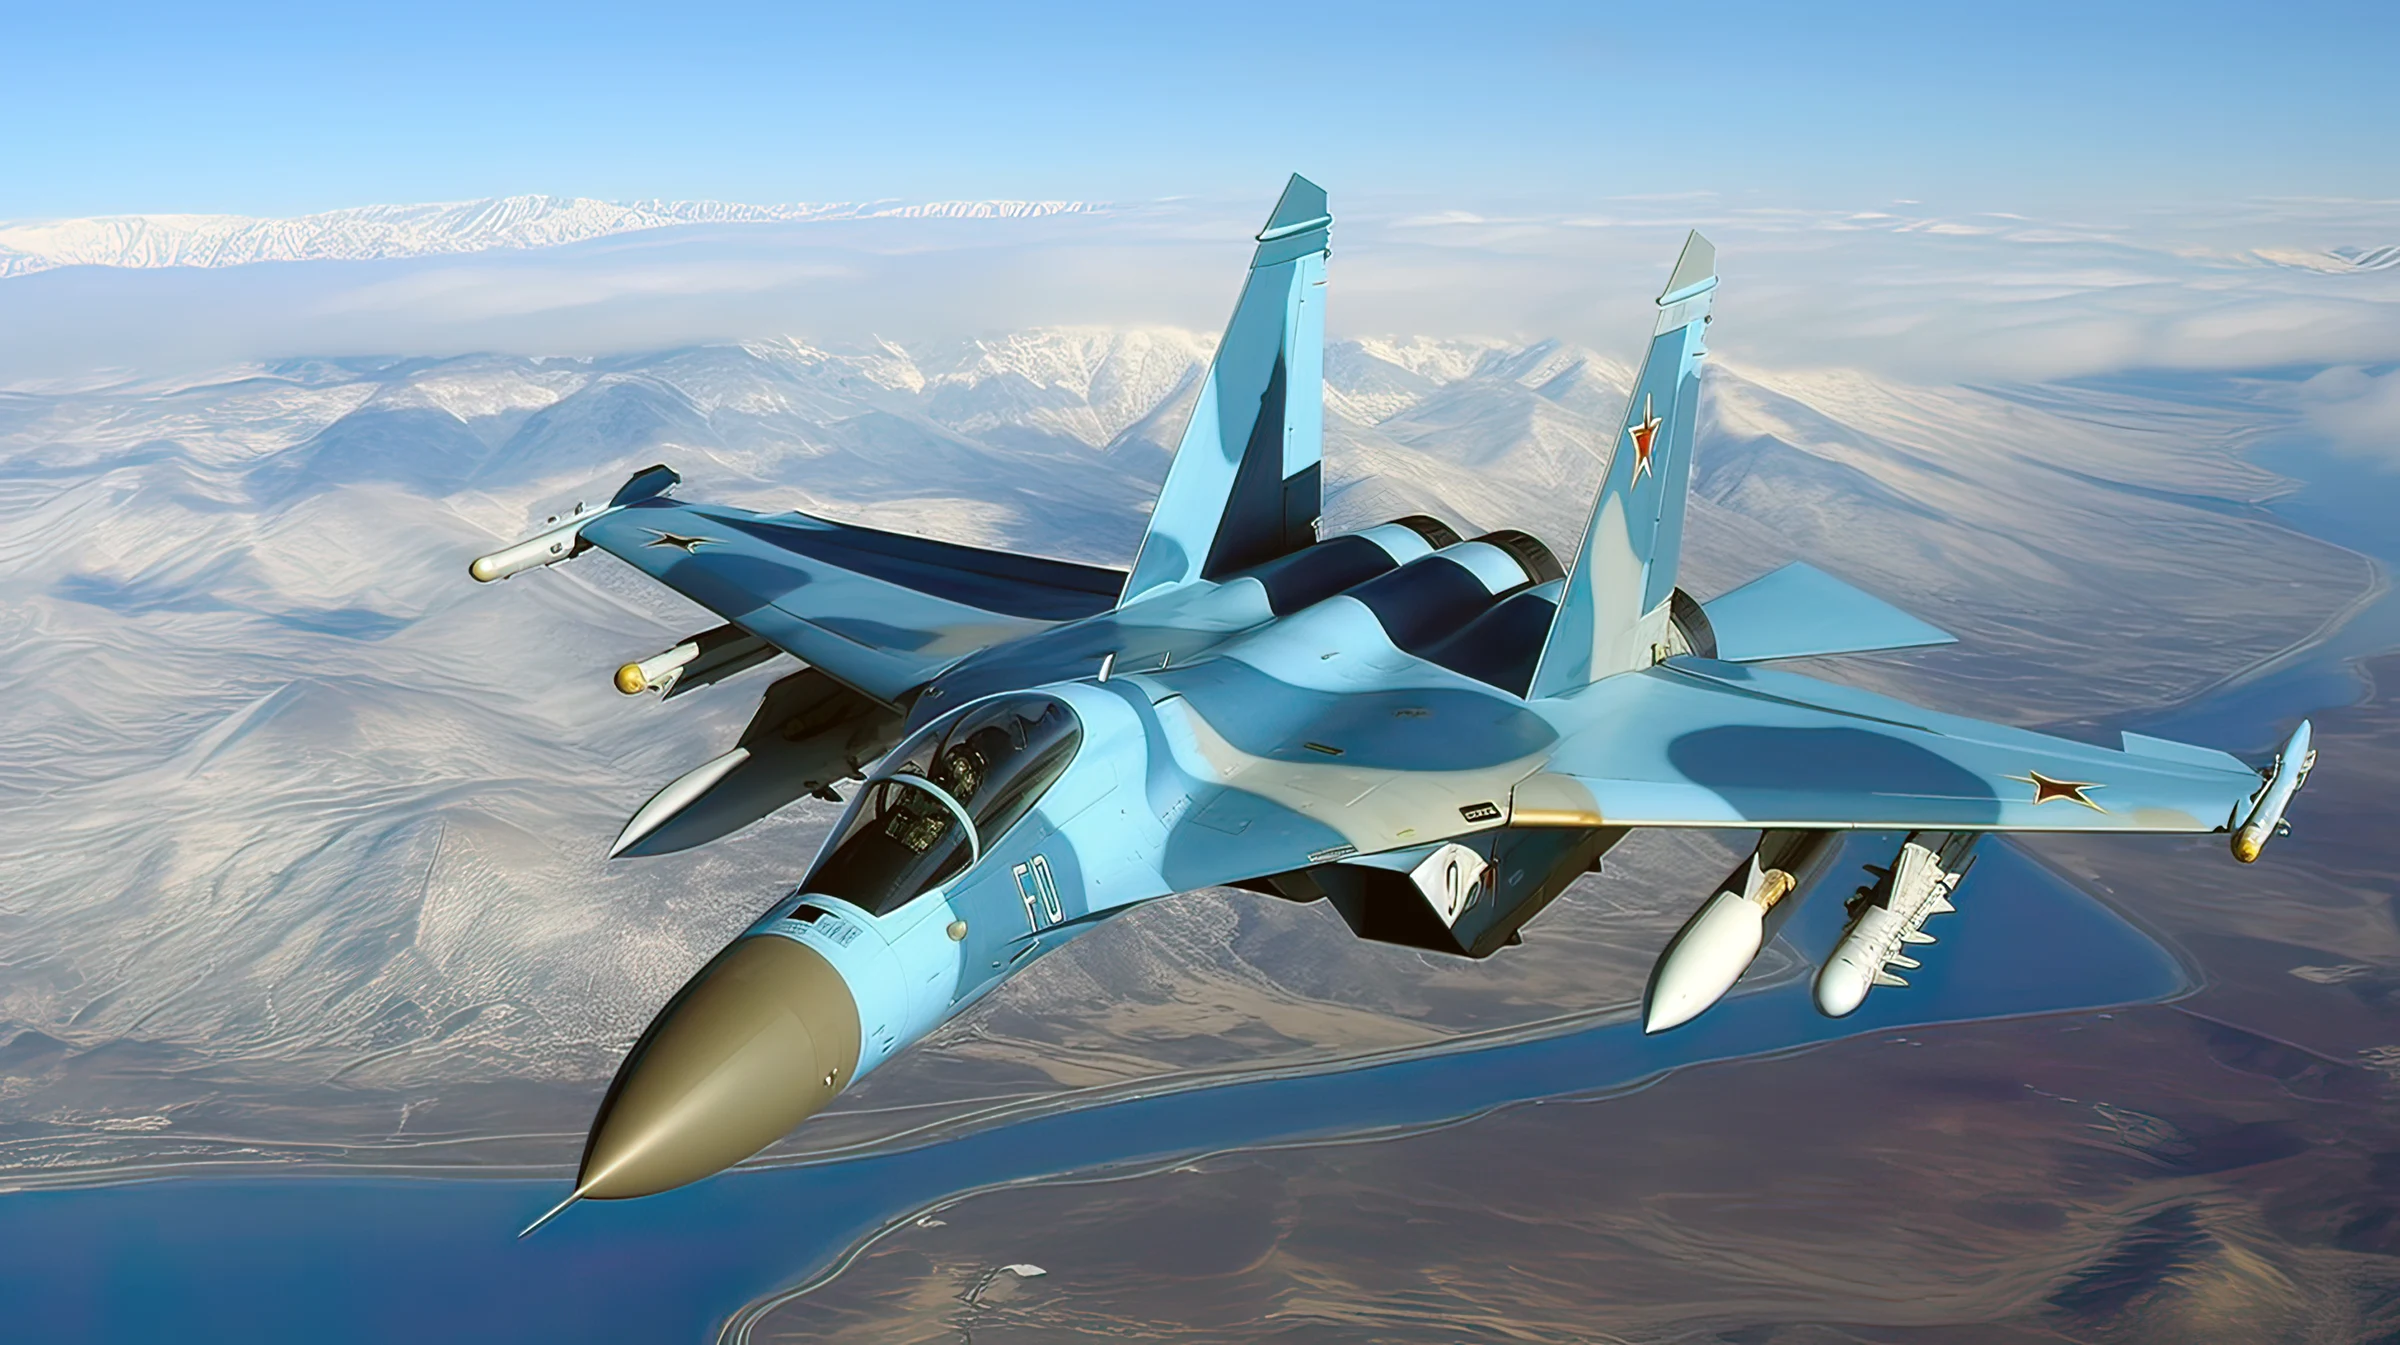 Iran bought Russian Su-35 fighter aircraft and Mi-28 helicopters